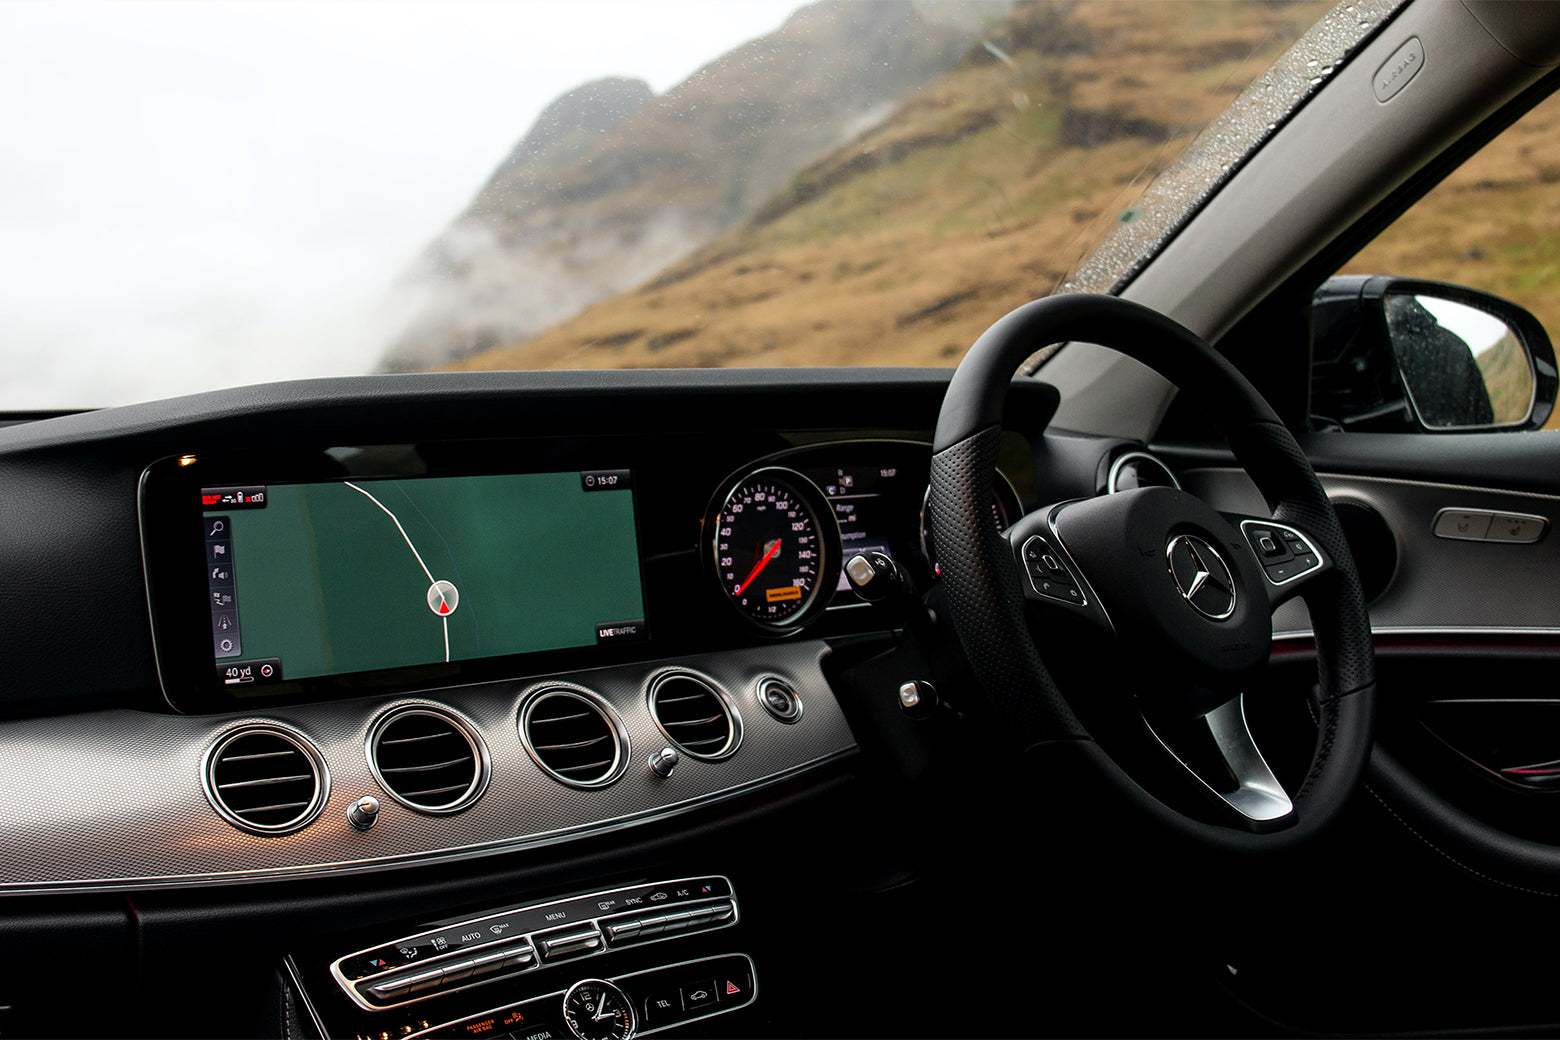 Interior of a Mercedes-Benz car showing the dashboard with a digital navigation screen, speedometer, and various control buttons. The background features a foggy landscape and hills.